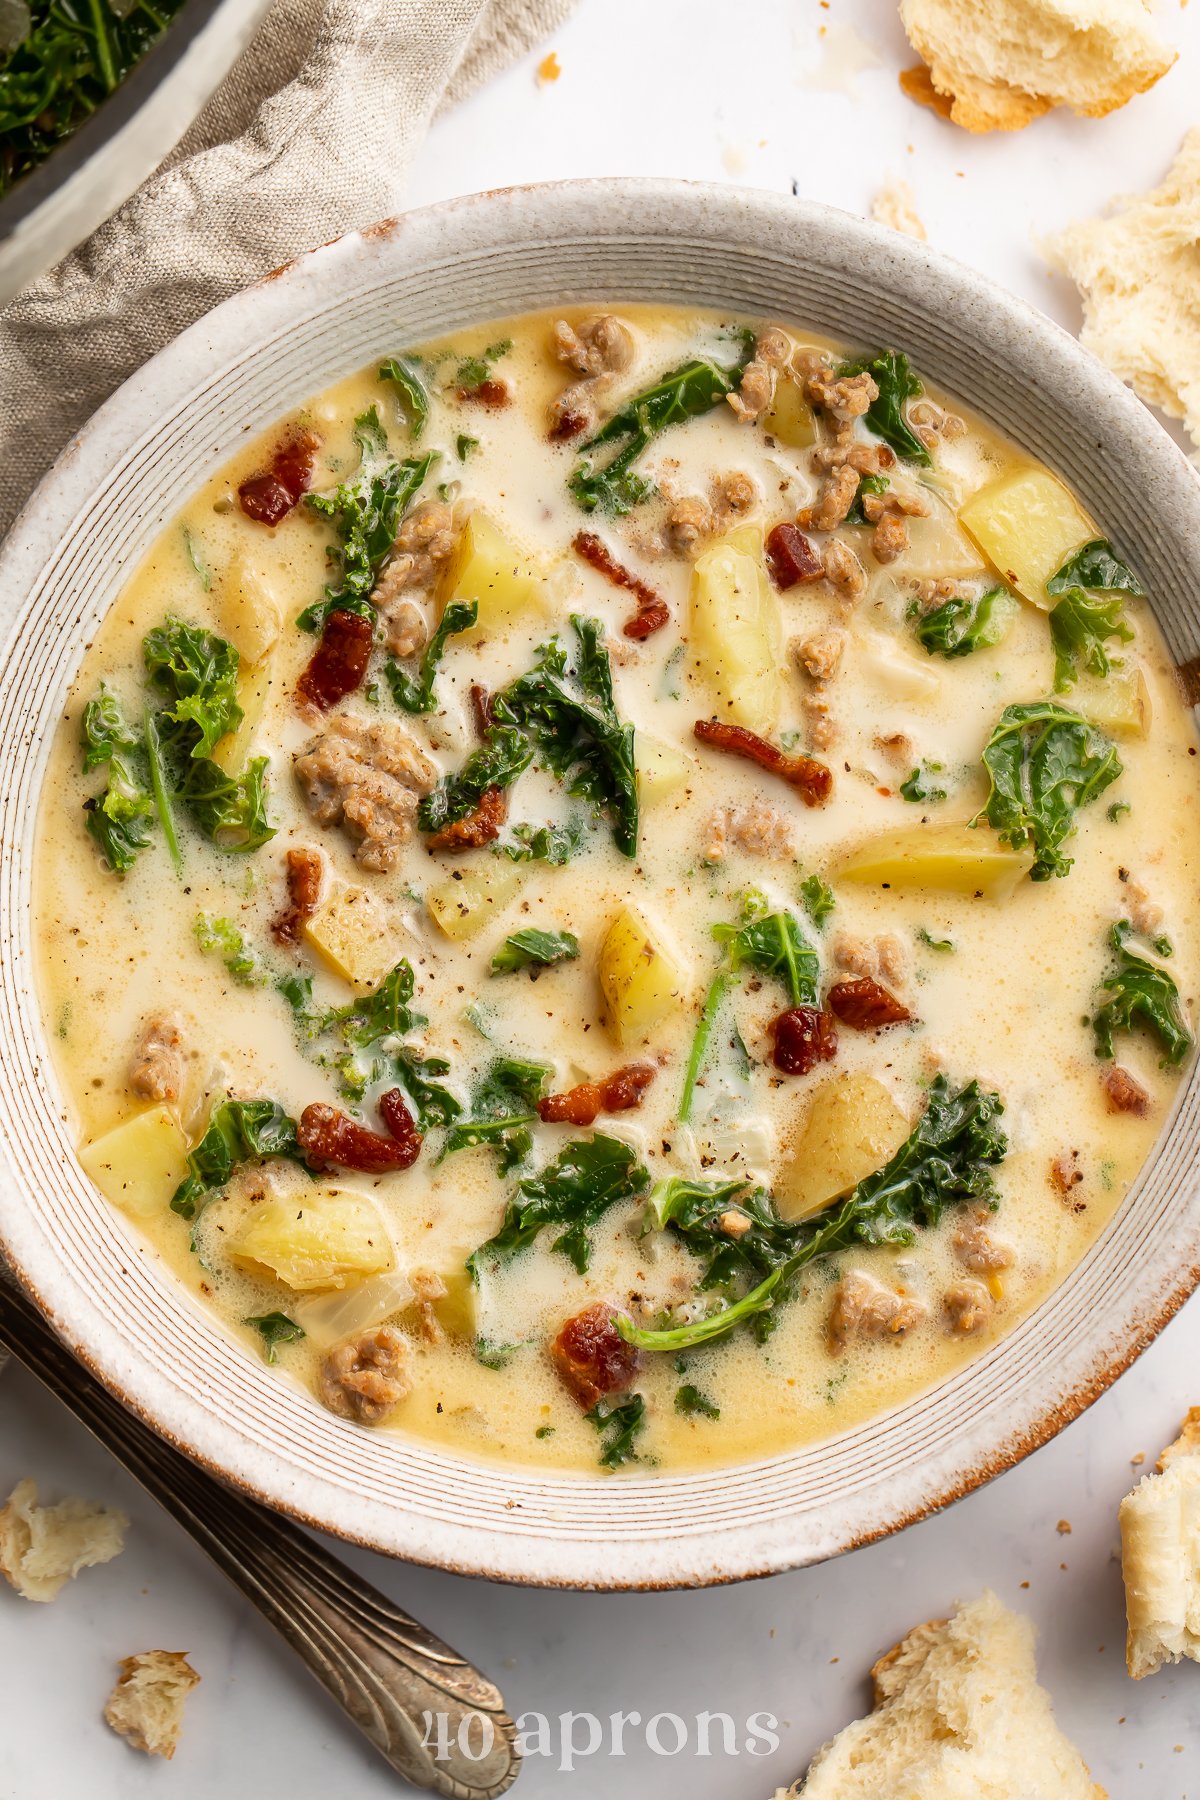 Overhead view of a white soup bowl holding Zuppa Toscana. Floating in the pale yellow soup are spinach, chopped bacon, and chunks of potatoes.